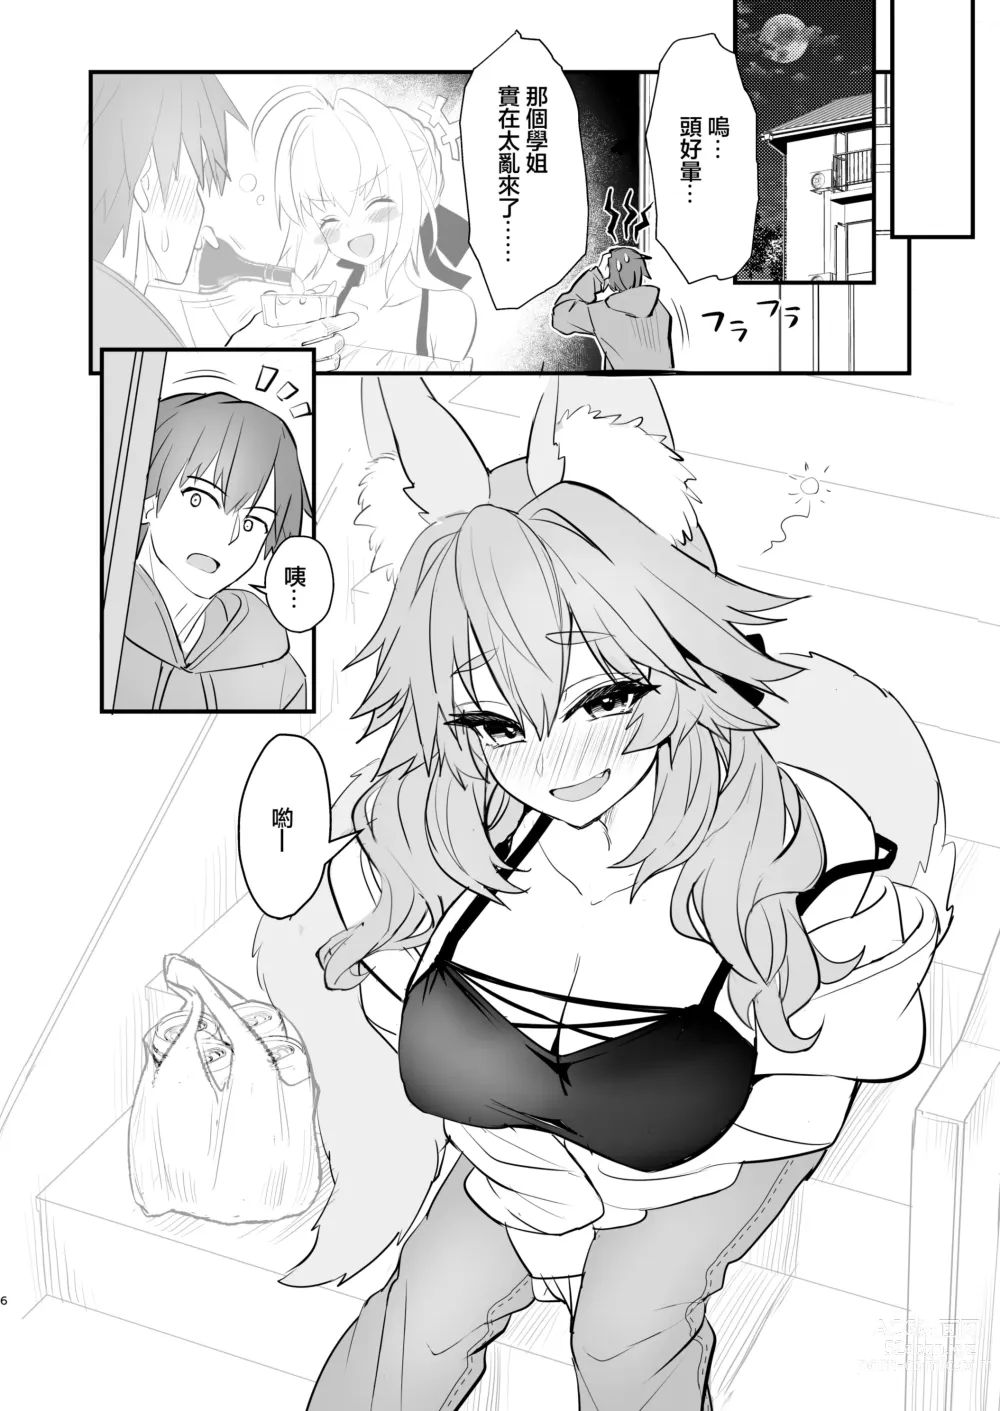 Page 5 of doujinshi 玉藻前大學物語